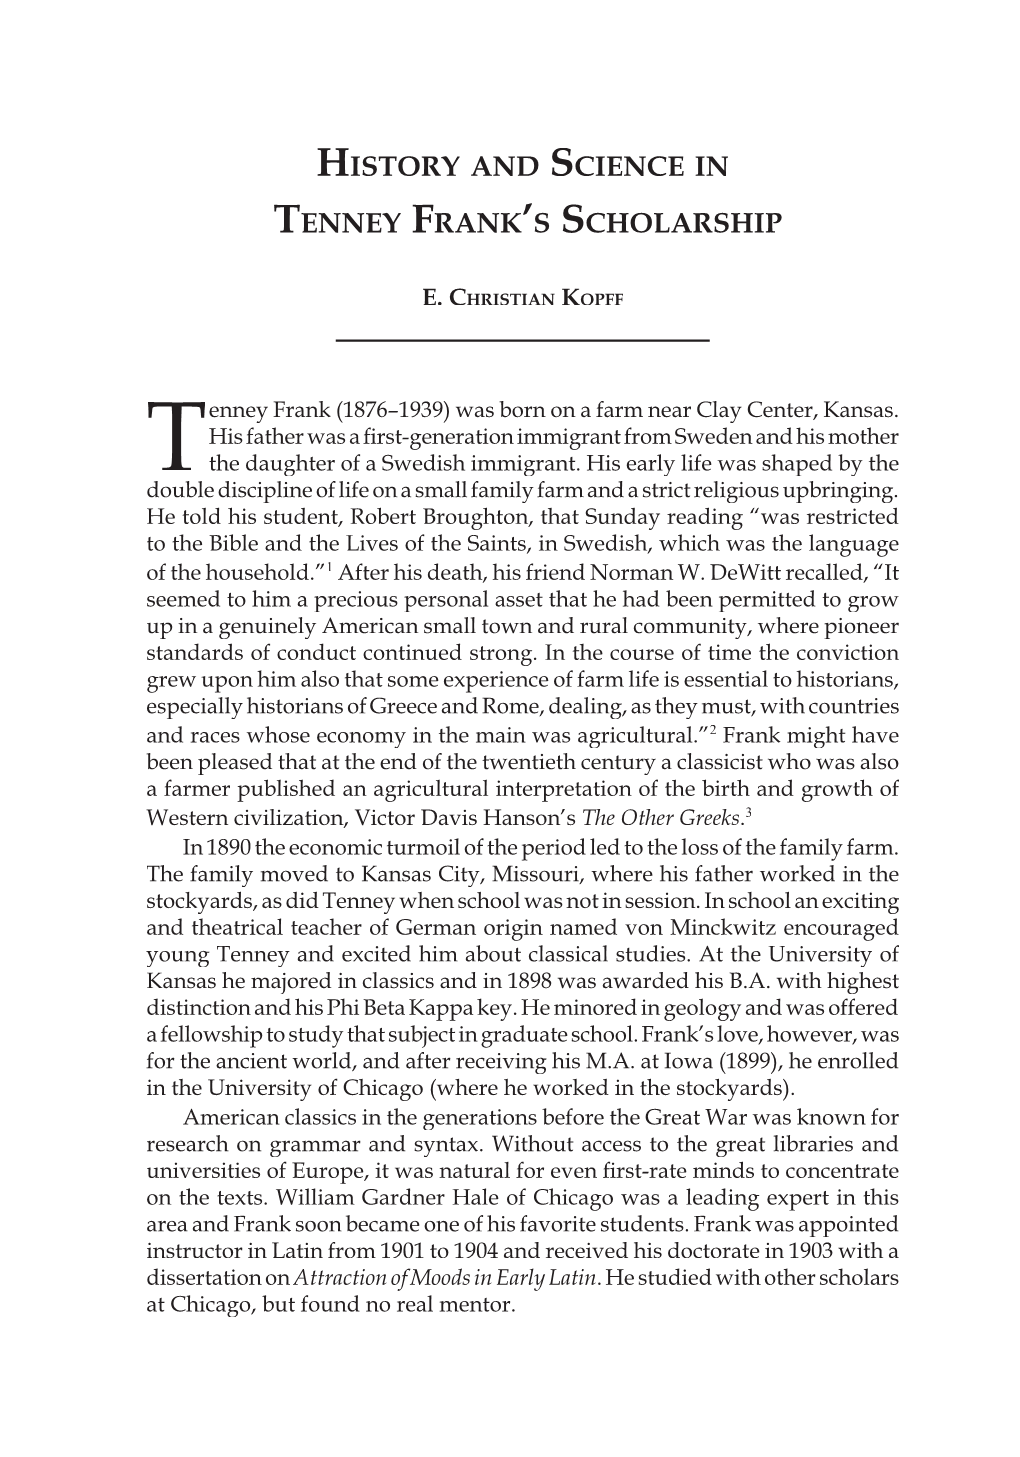 History and Science in Tenney Frank's Scholarship